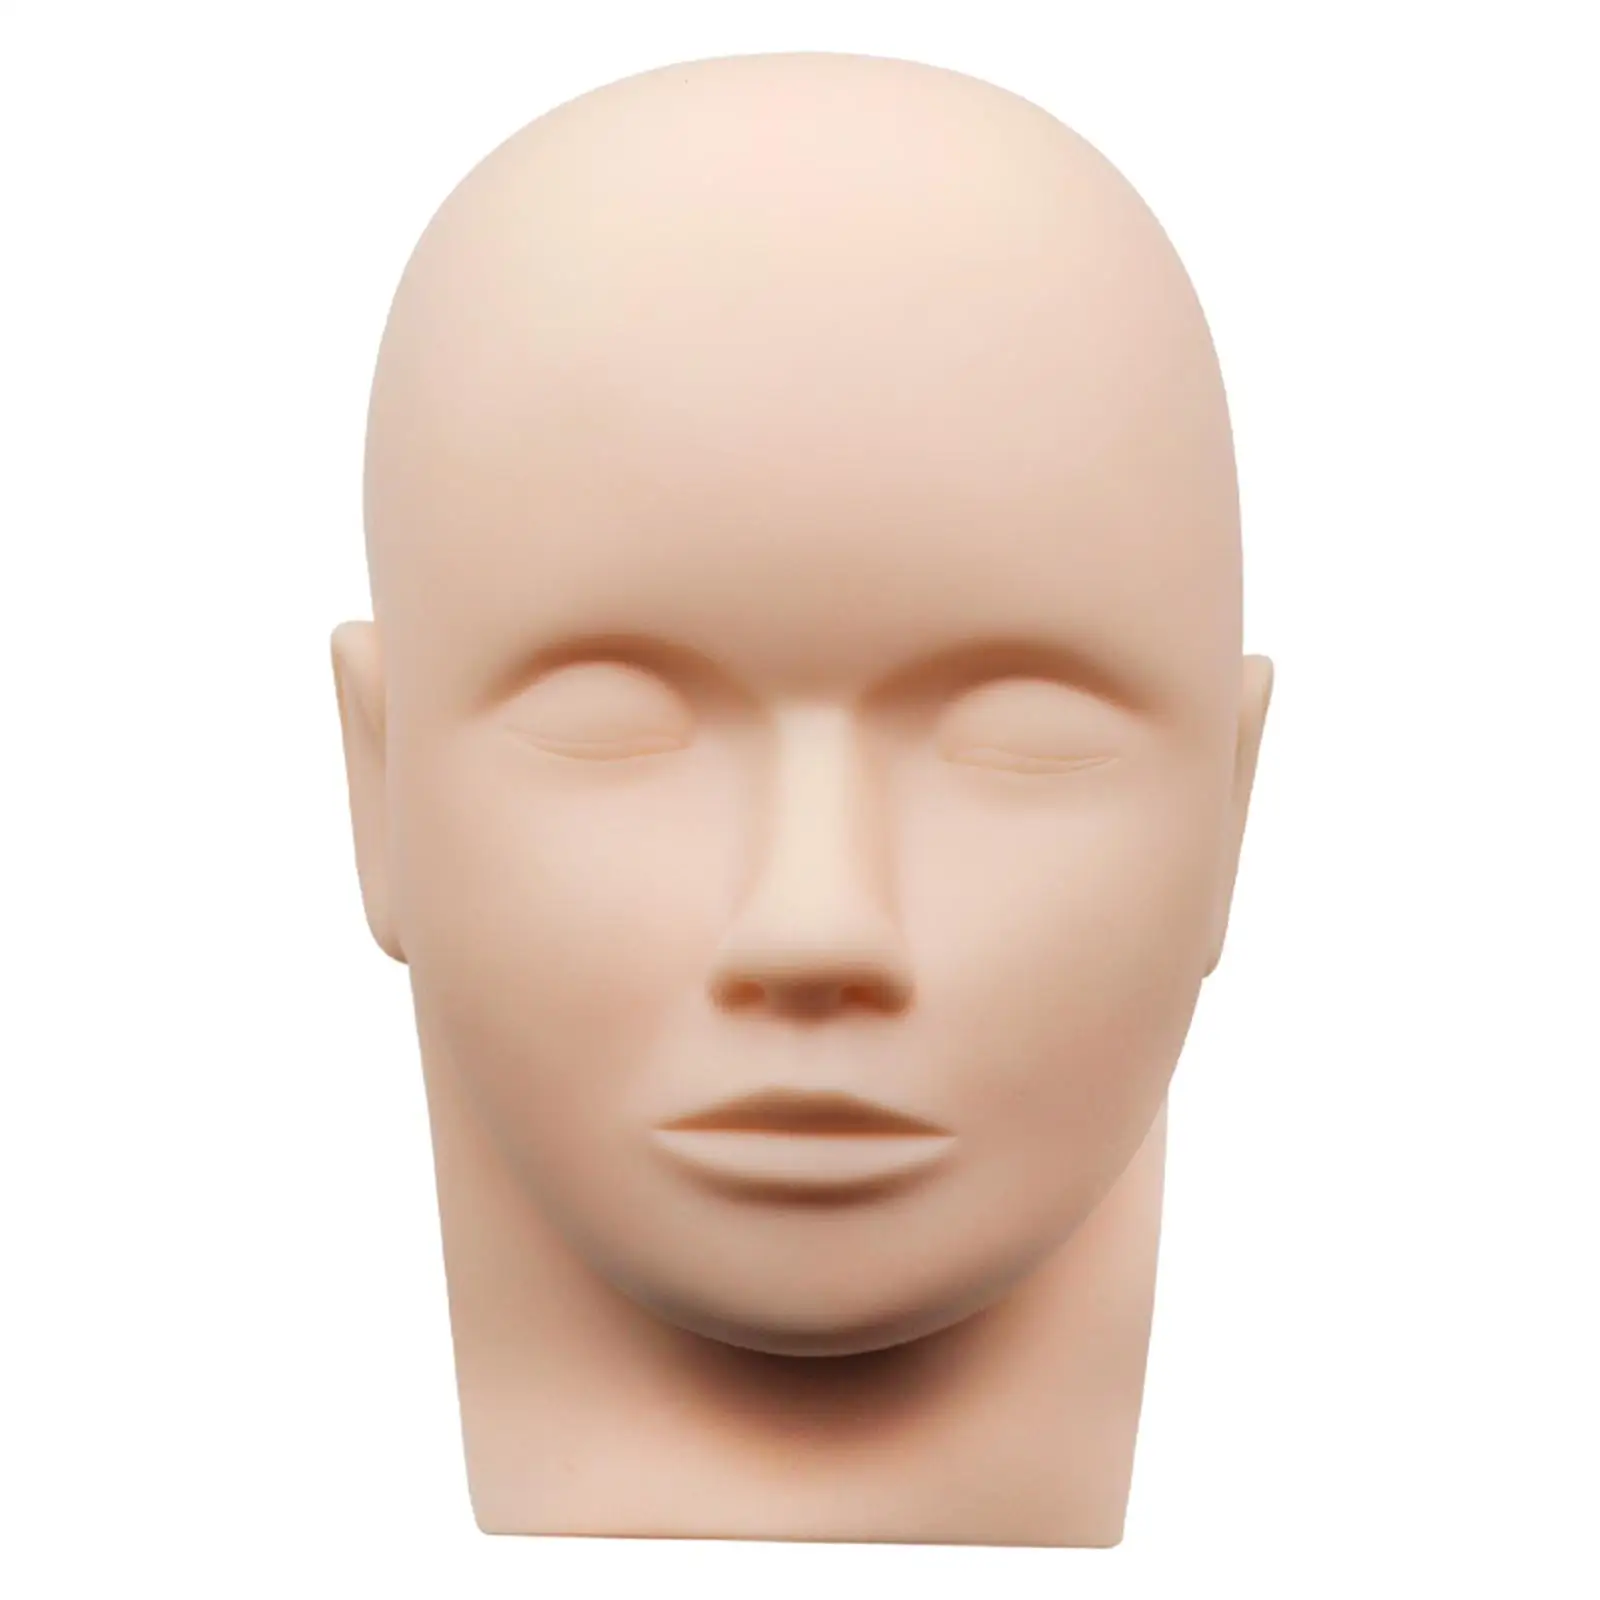 Eyelash Silicone Head Mold Lash Extension Supplies Soft Touch Training Mannequin